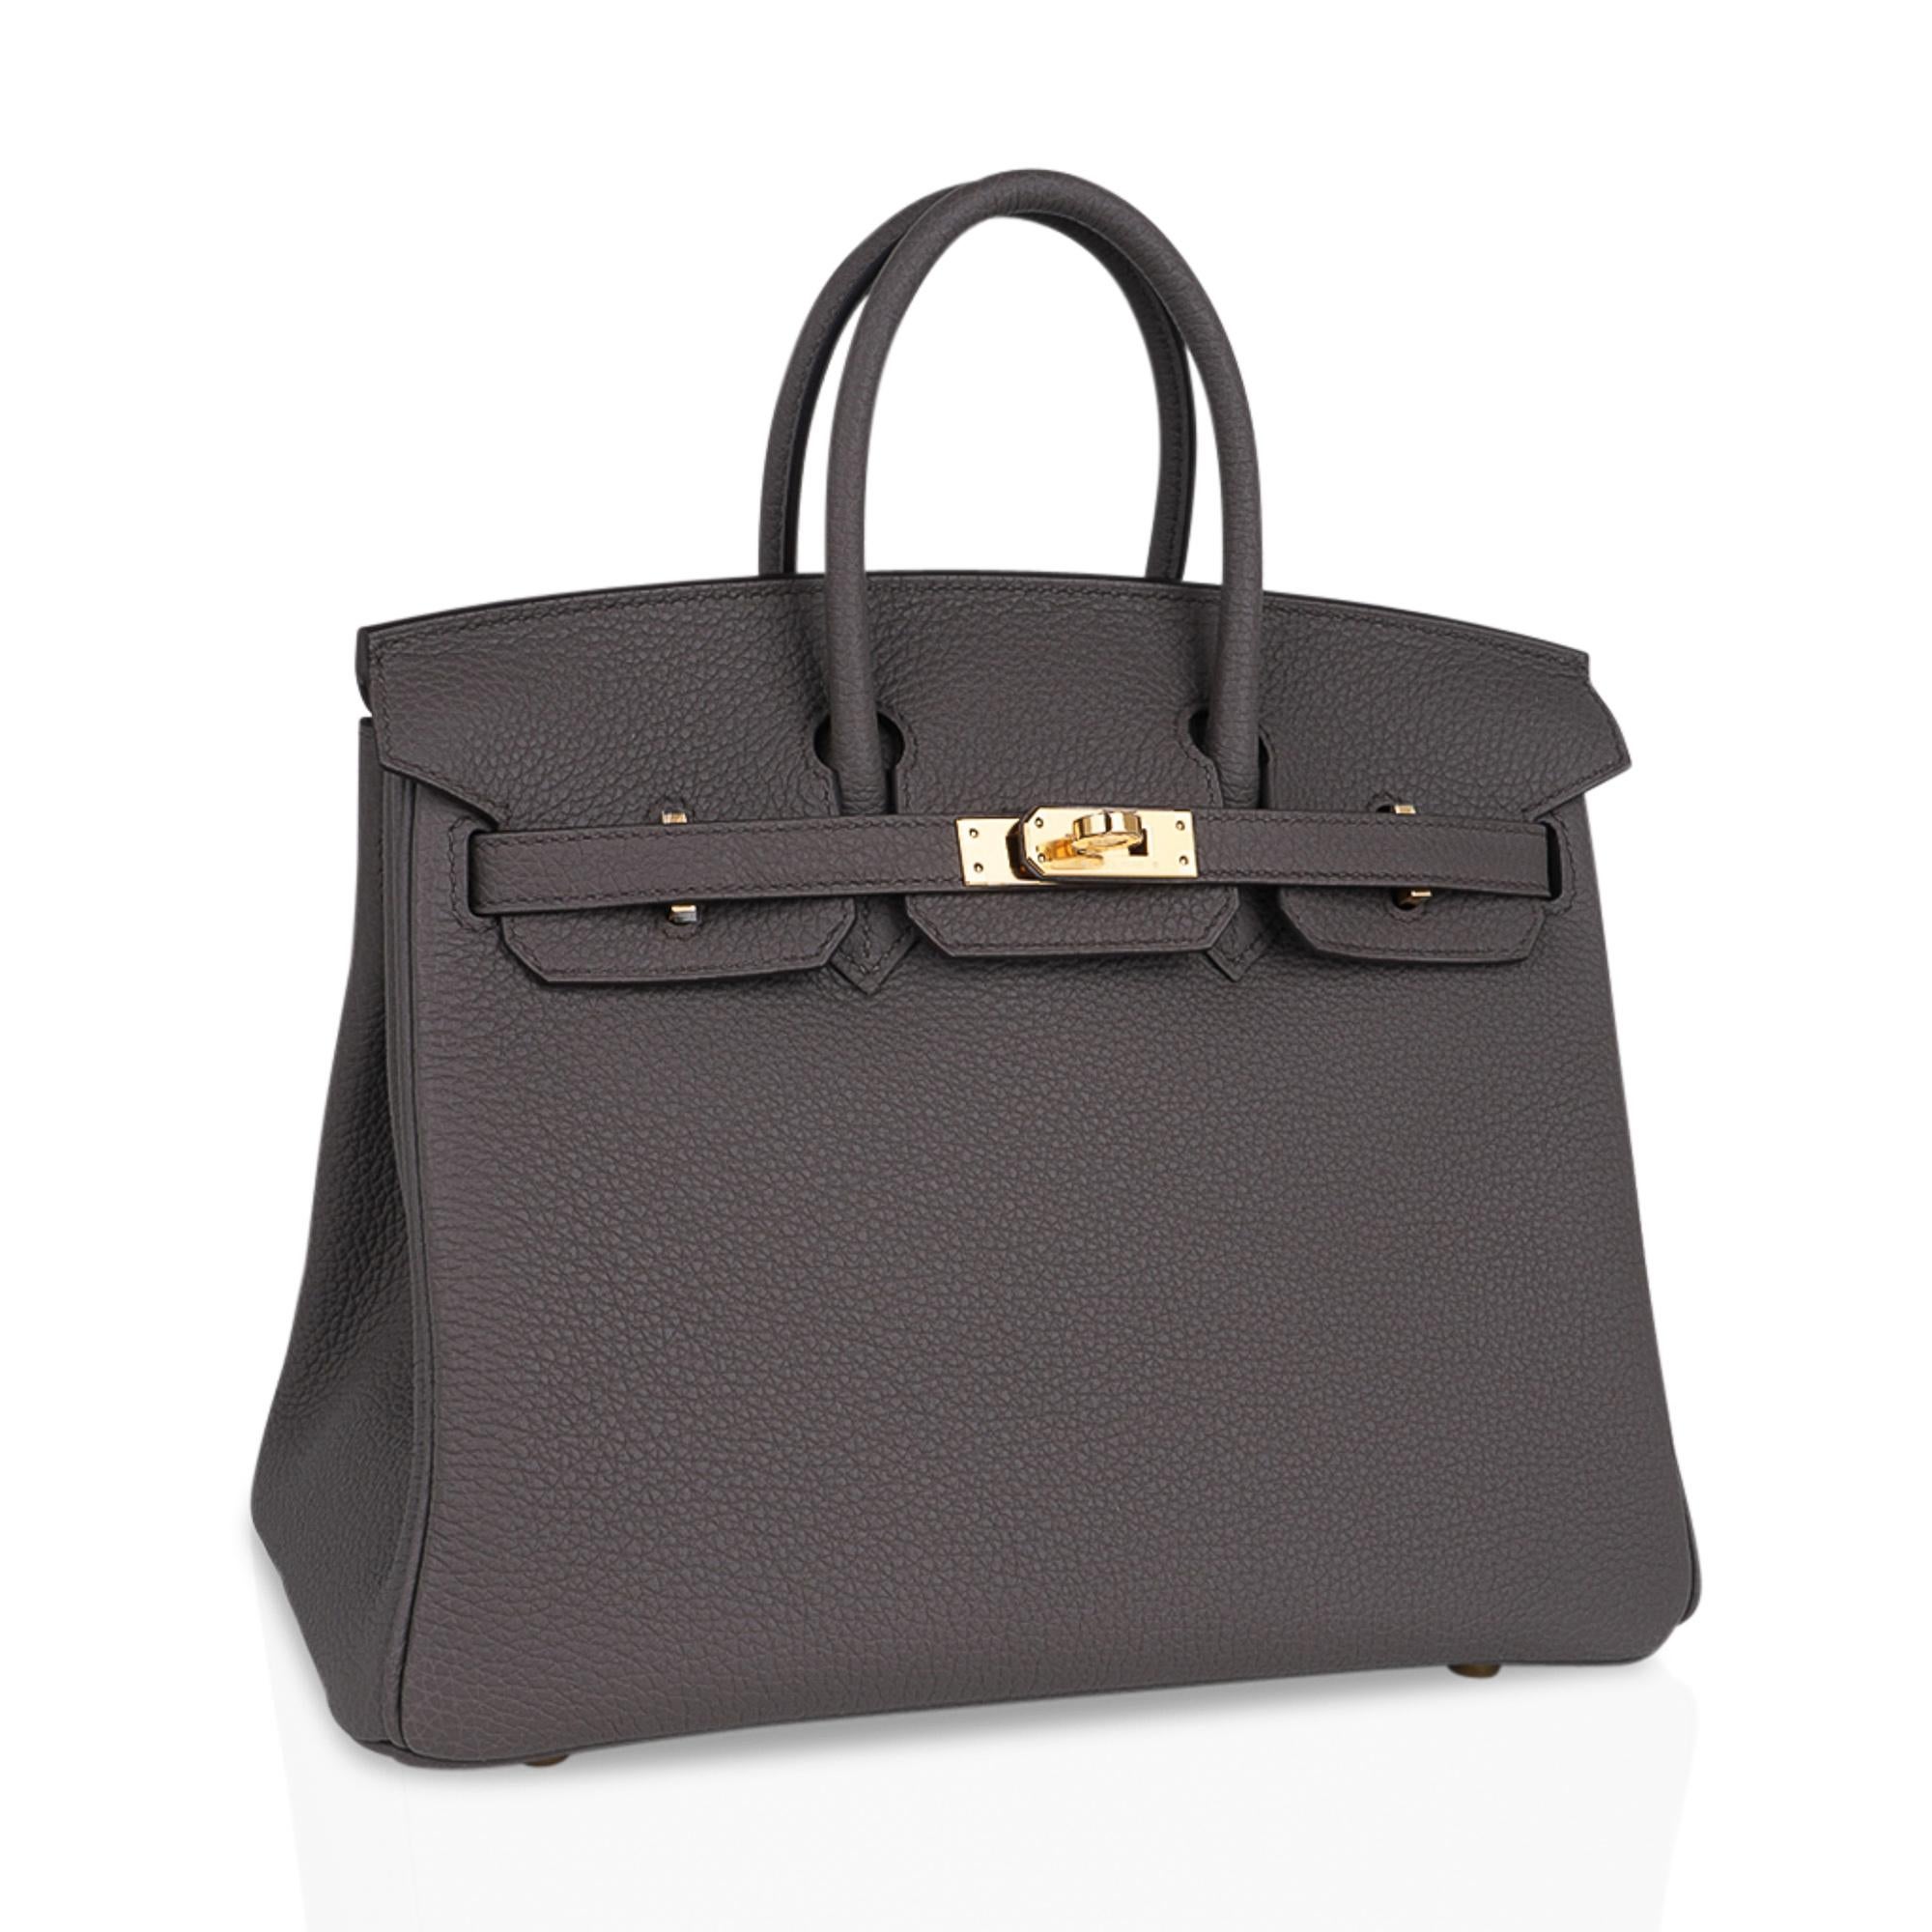 Mightychic offers an Hermes Birkin 25 bag featured in Etain.
Stunning rich neutral Hermes Birkin bag perfect for year round wear.
Lush with Gold hardware.
Supple Togo leather.
NEW or NEVER WORN
Comes with the lock and keys in the clochette,